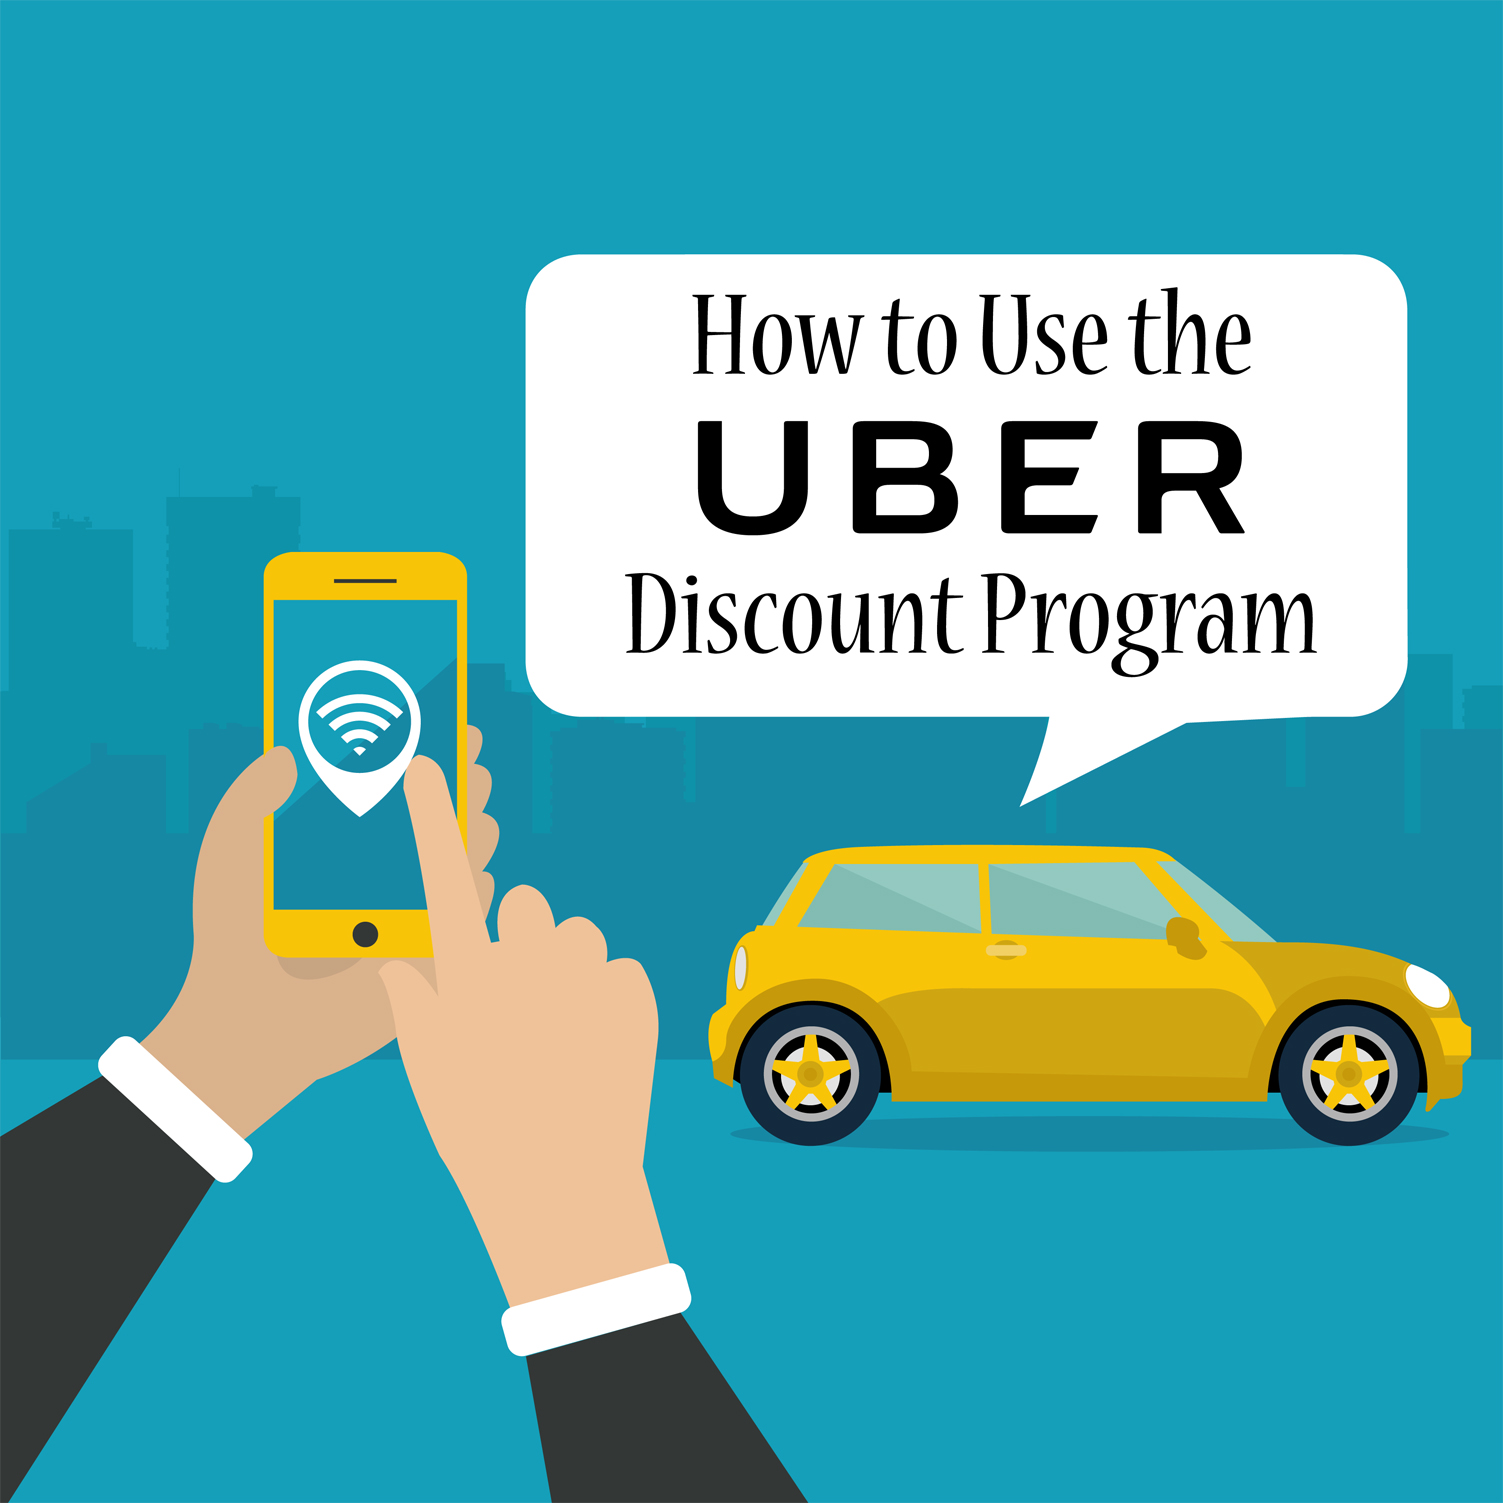 UPDATE: Easy-to-Follow Steps to Use DCTA’s Uber Discount Program in Highland Village